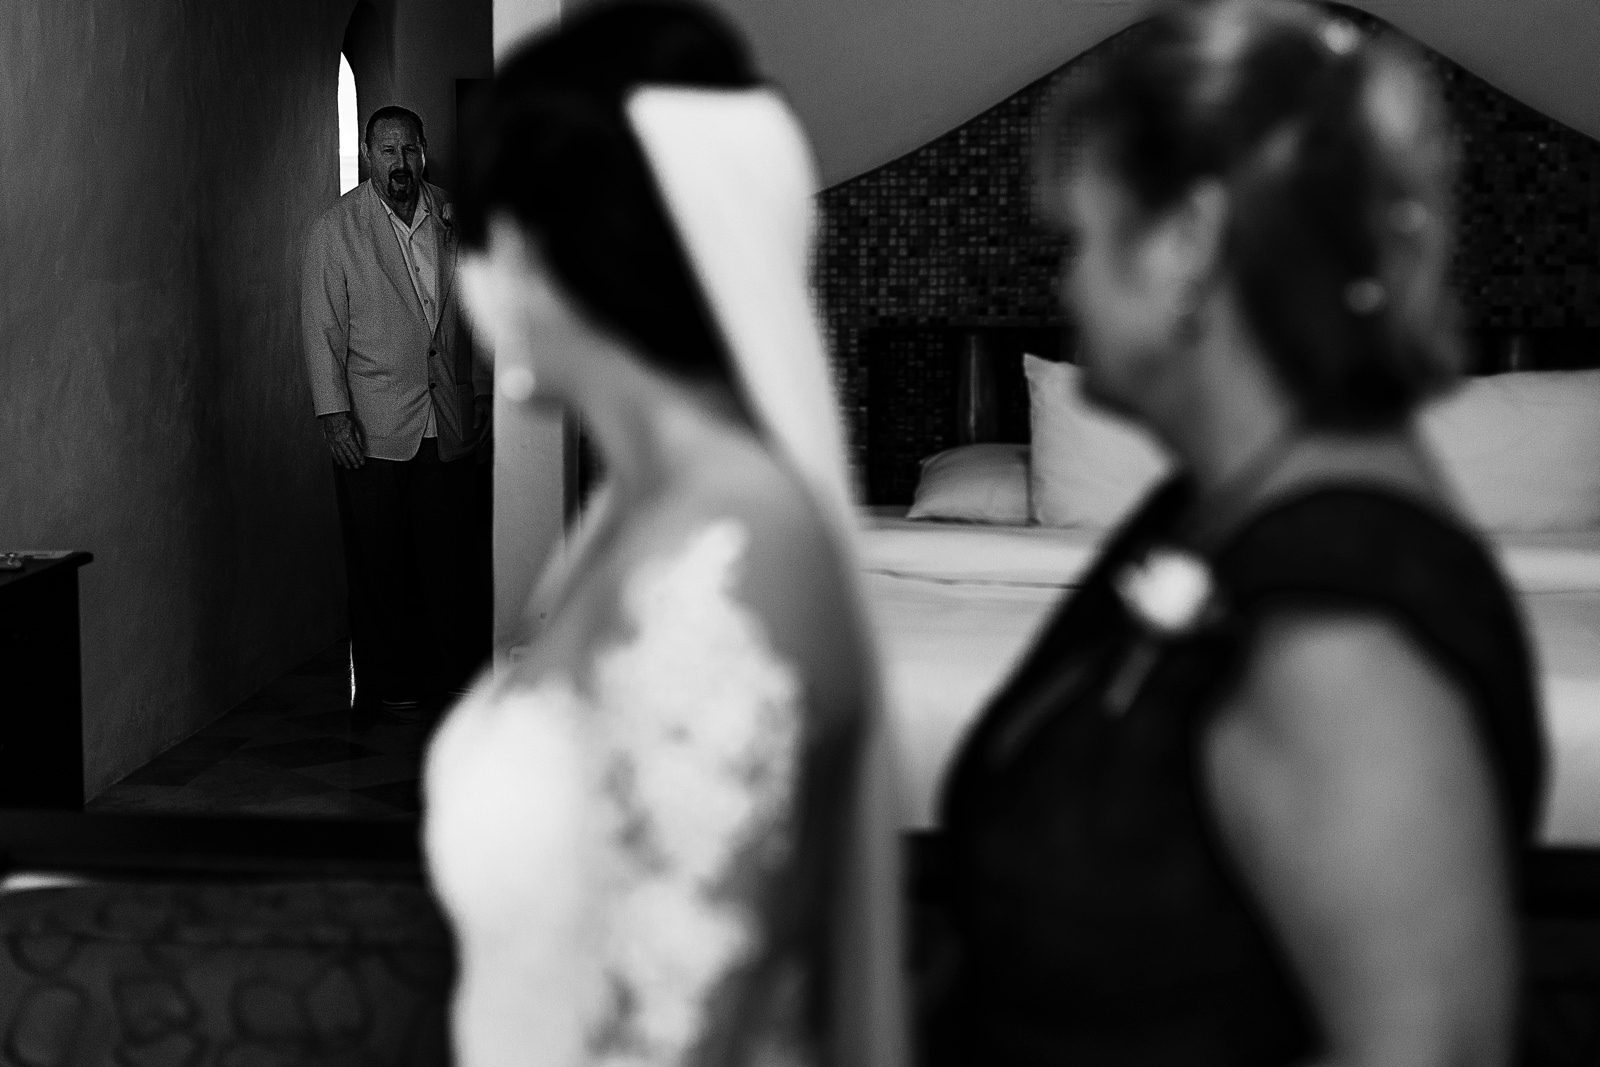 Father of the bride walking into the bridal suite before the ceremony